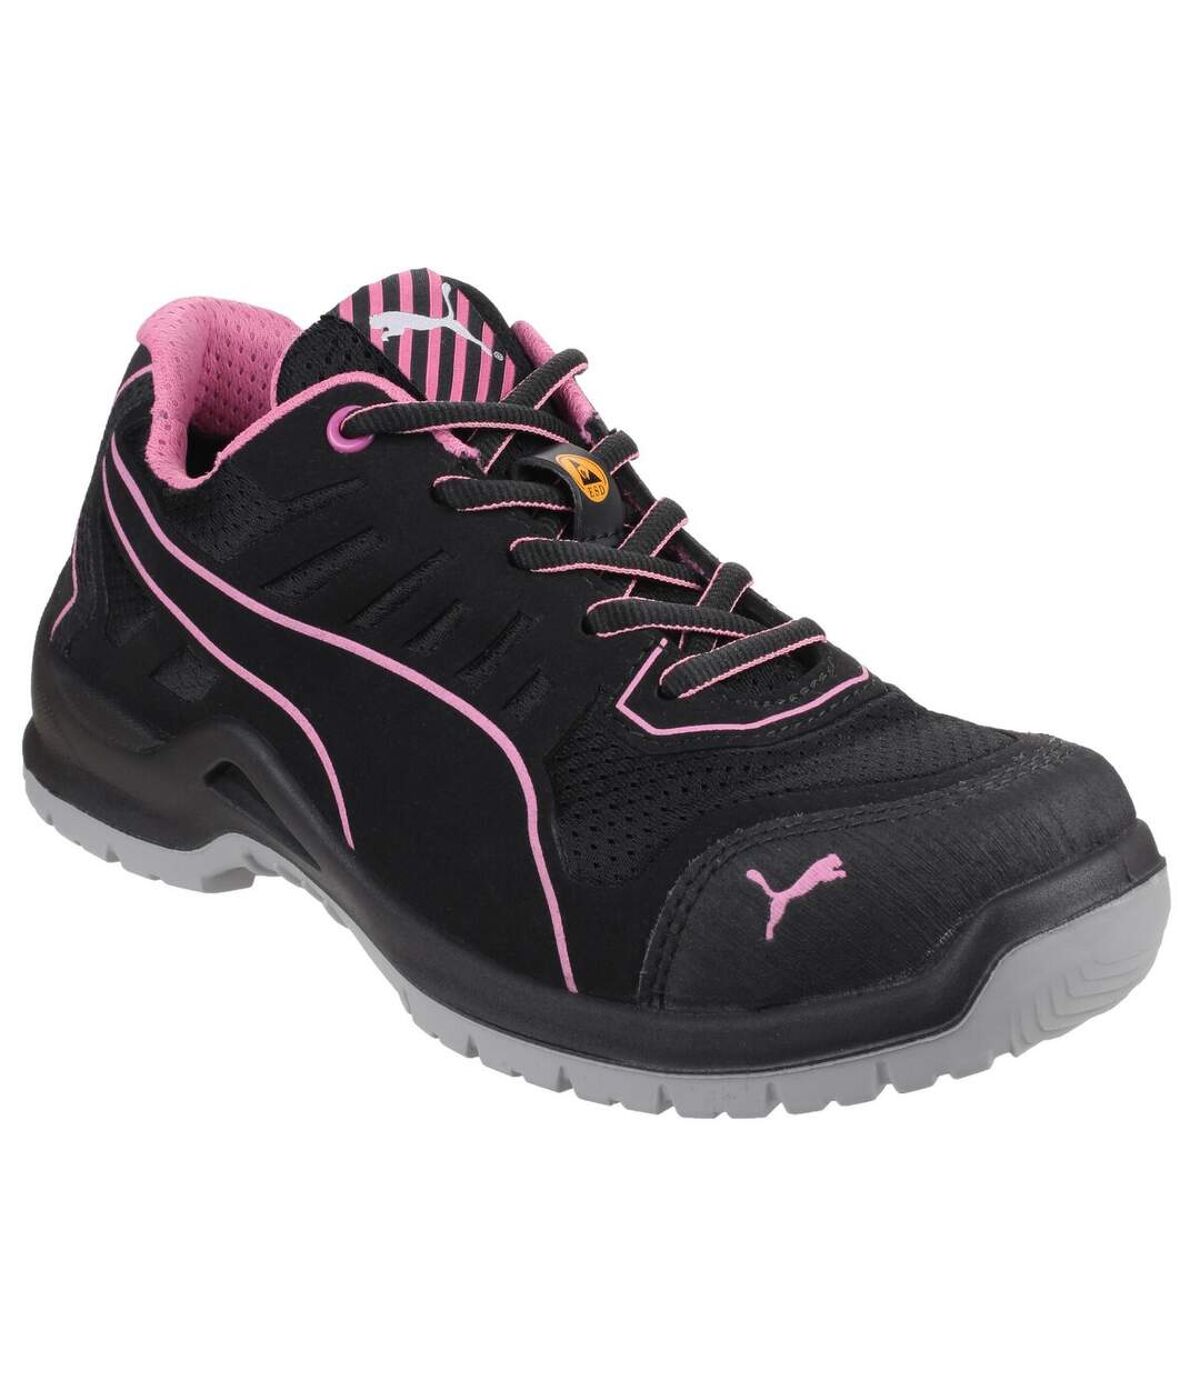 Puma Safety Womens/Ladies Lightweight Fuse TC Safety Trainers/Sneakers (Black) - UTFS3852